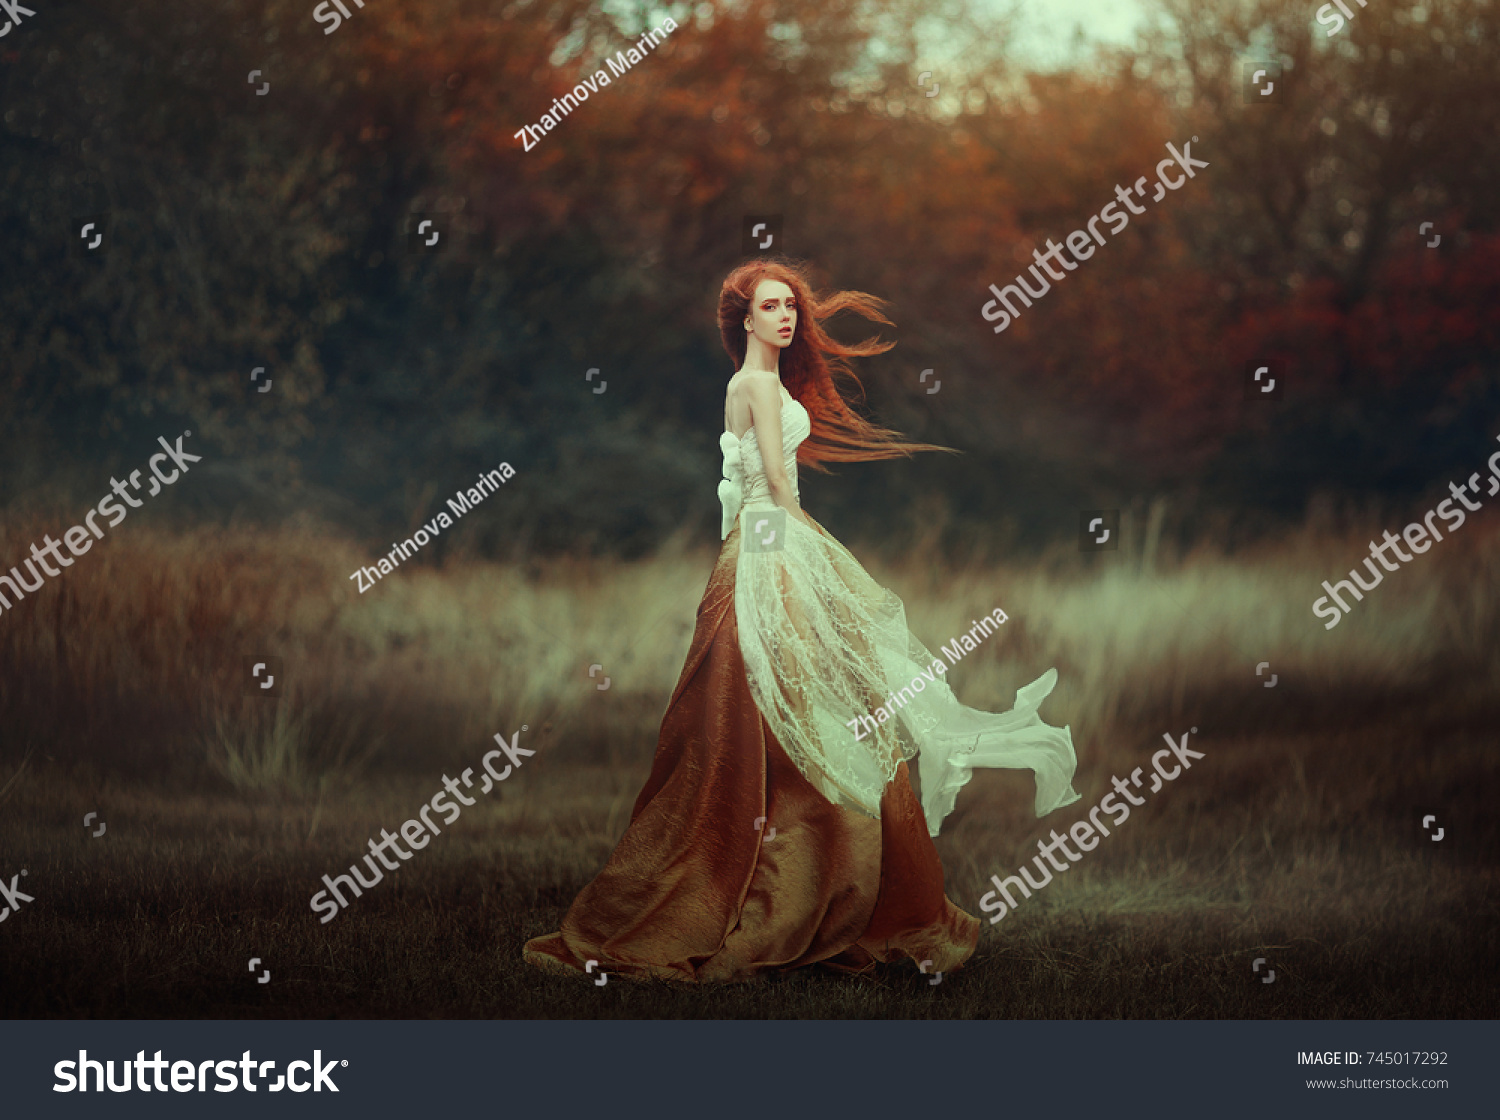 Beautiful young woman with very long red hair in a golden medieval dress walking through the autumn forest. Long red hair develops in the wind. #745017292